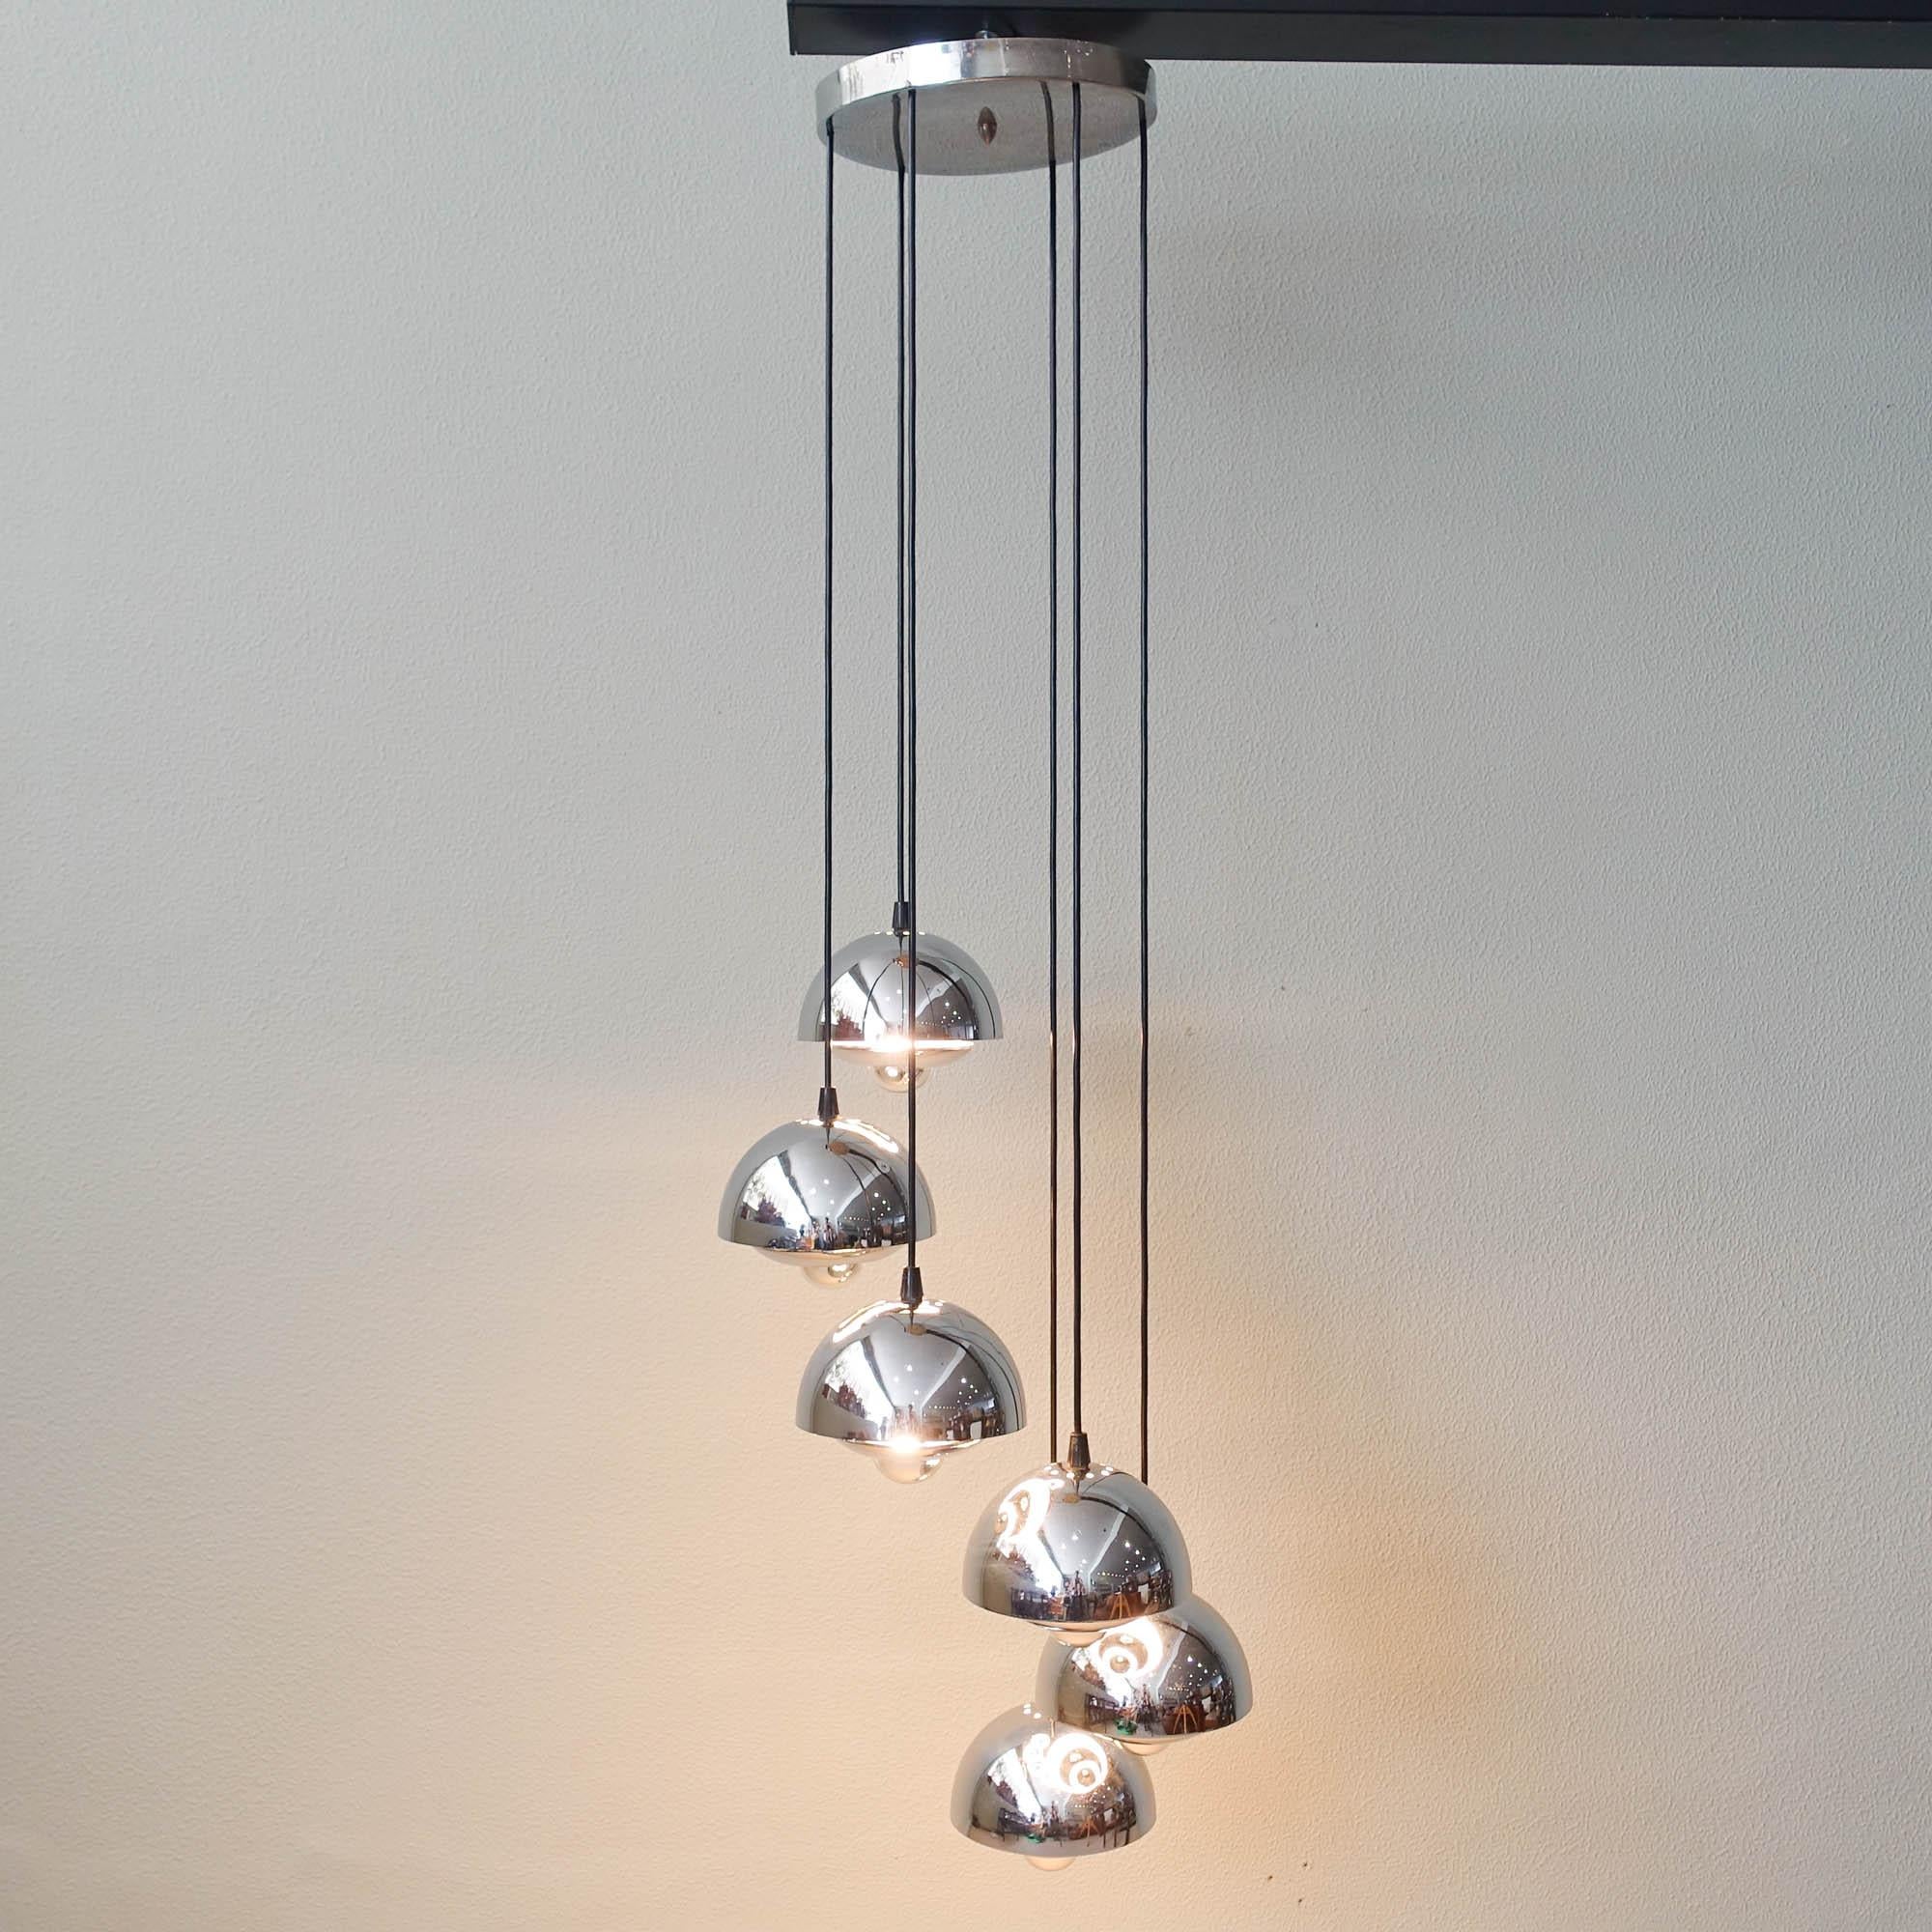 This chromed metal cascade lamp was designed and produced in Portugal during the 1970's. It feature six balls in chromed metal, that gives an indirect light when the proper mirror bulbs are used. Adjustable height. It is in original and good vintage